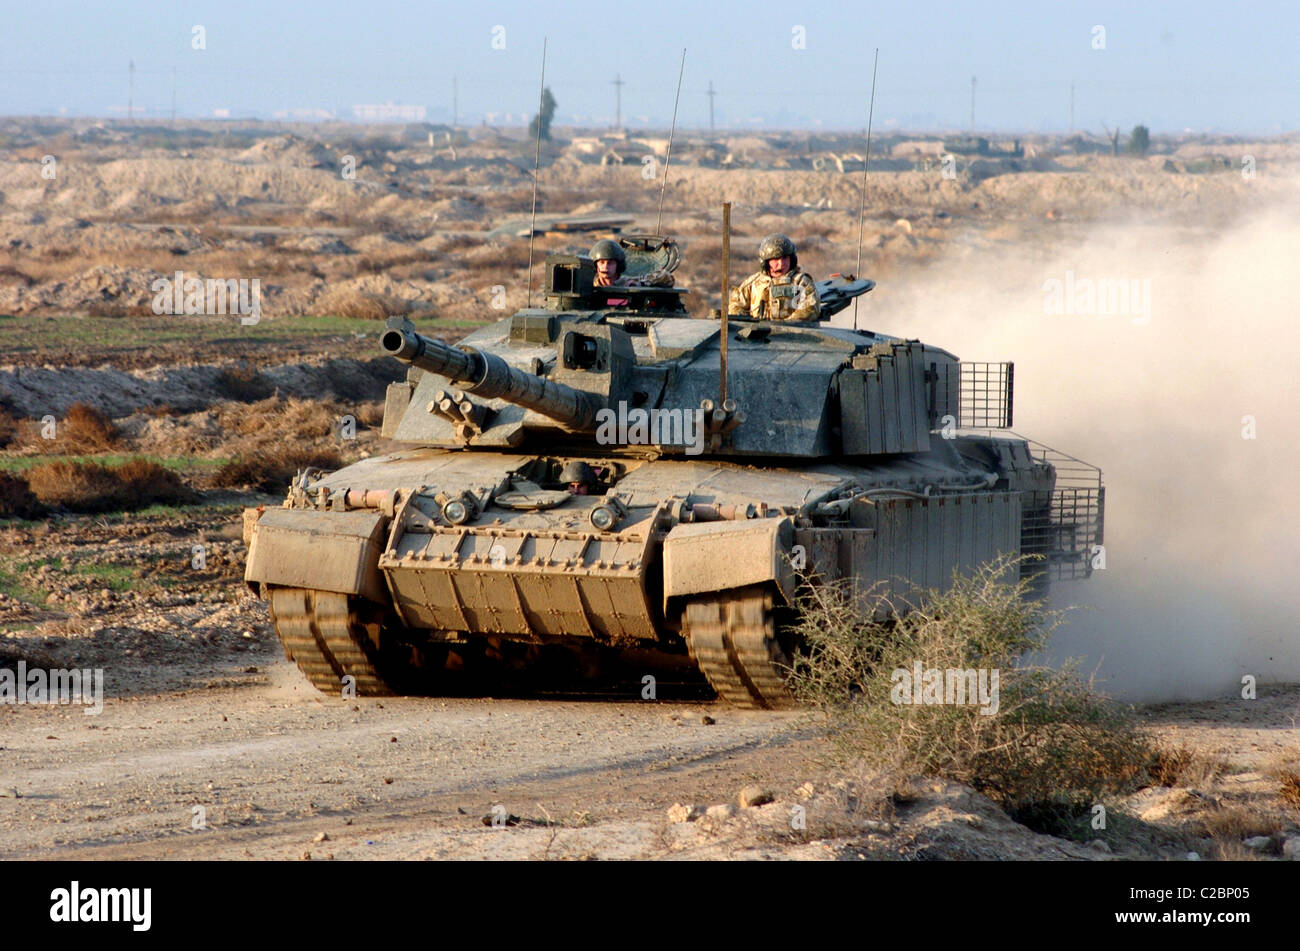 Members from the 1st Battalion Welsh guards on their tour of duty in Iraq challenger 2 tank on patrol Stock Photo